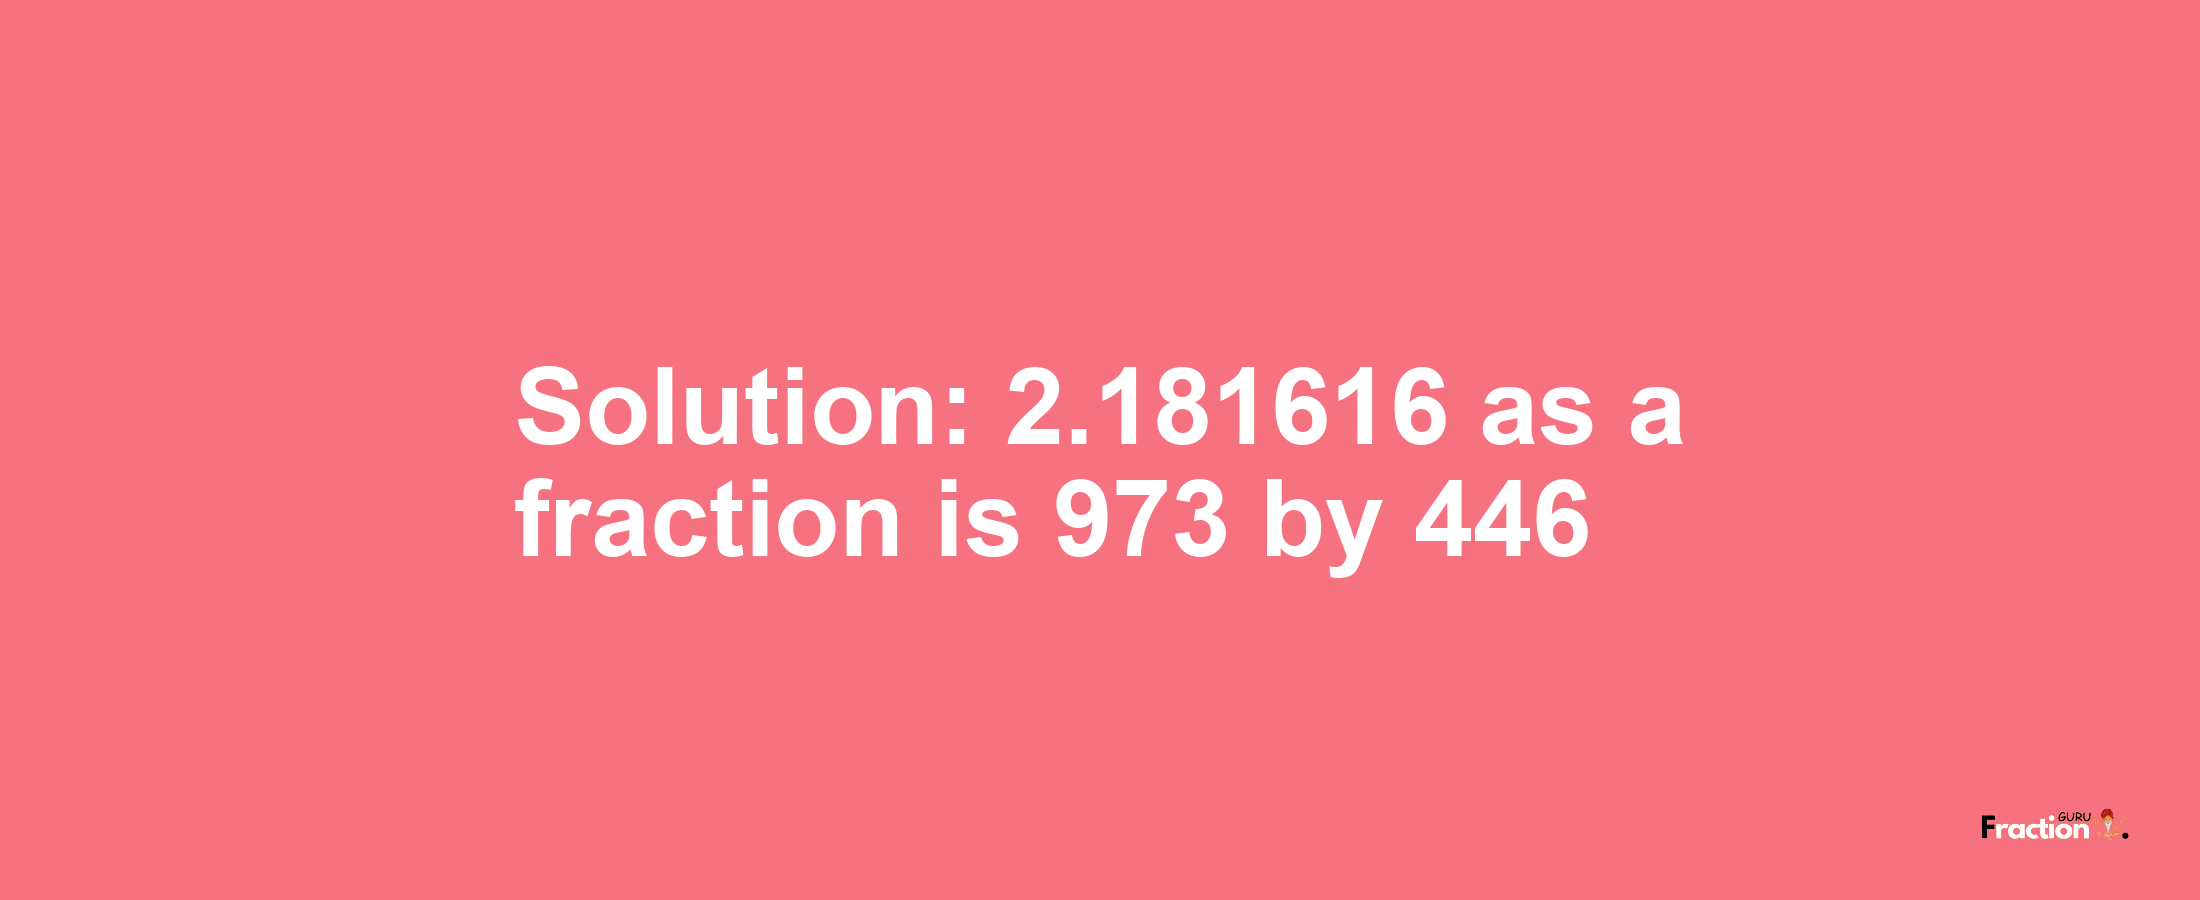 Solution:2.181616 as a fraction is 973/446